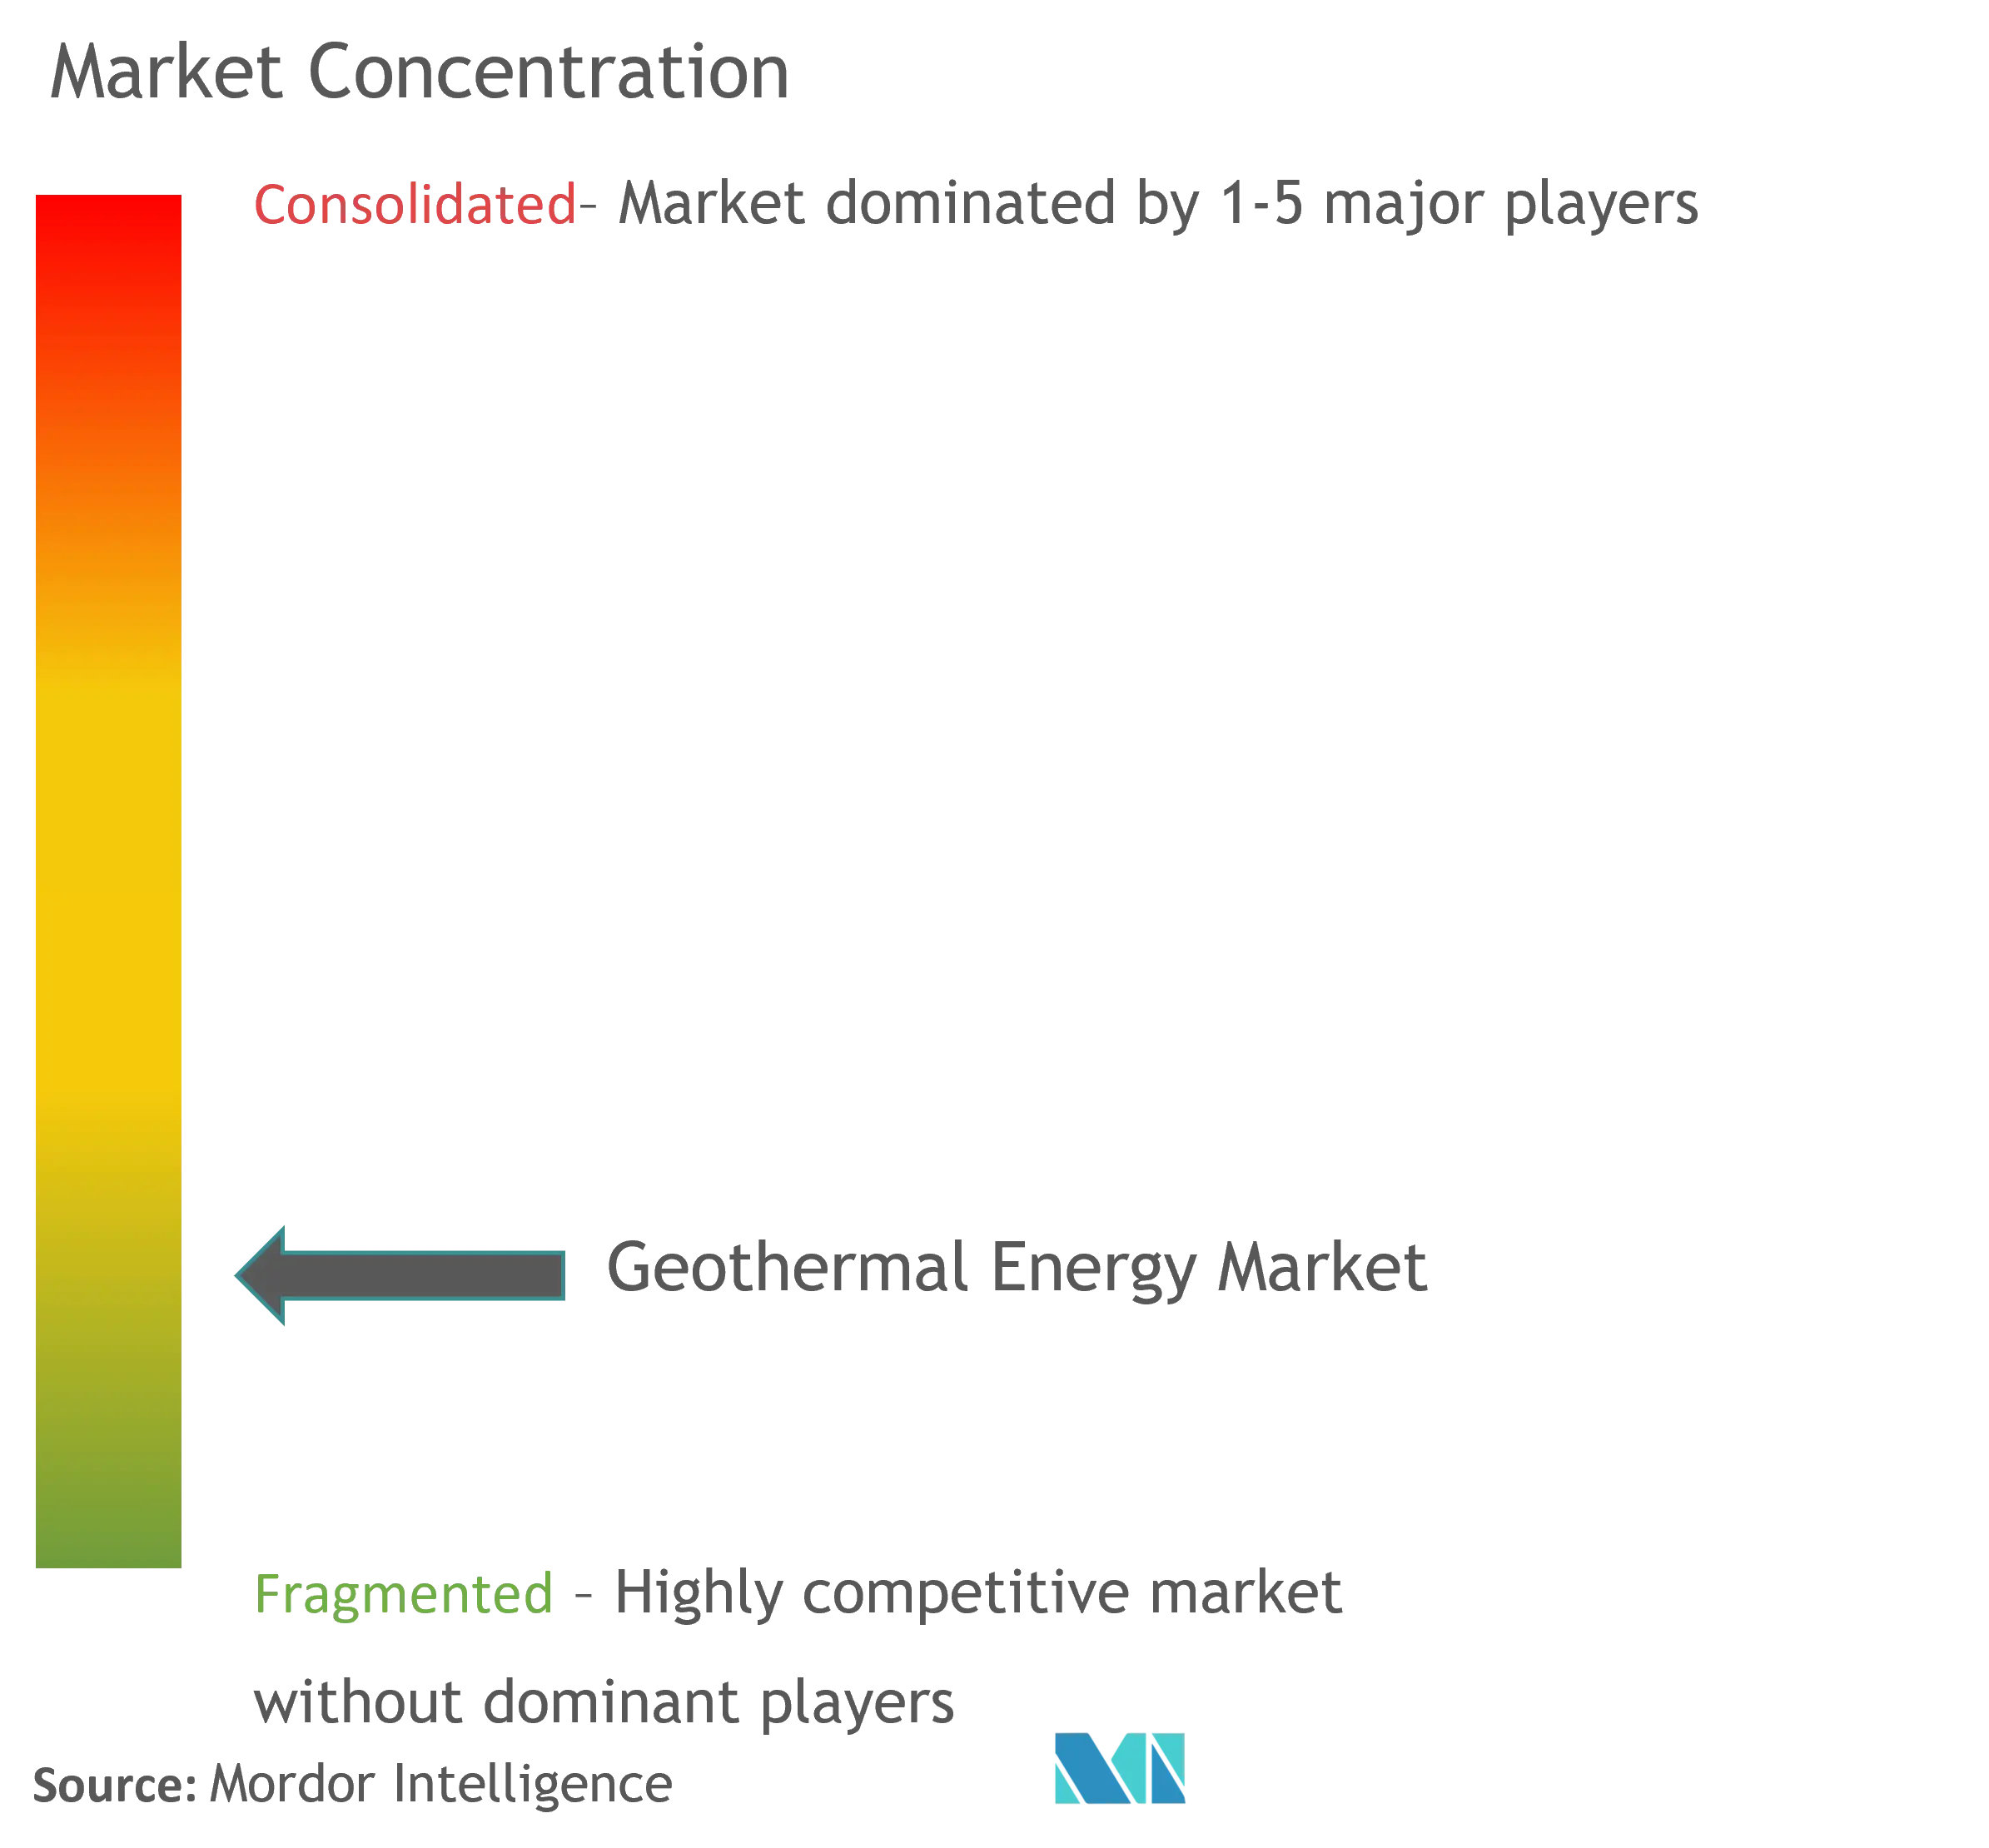 Geothermal Energy Market Concentration